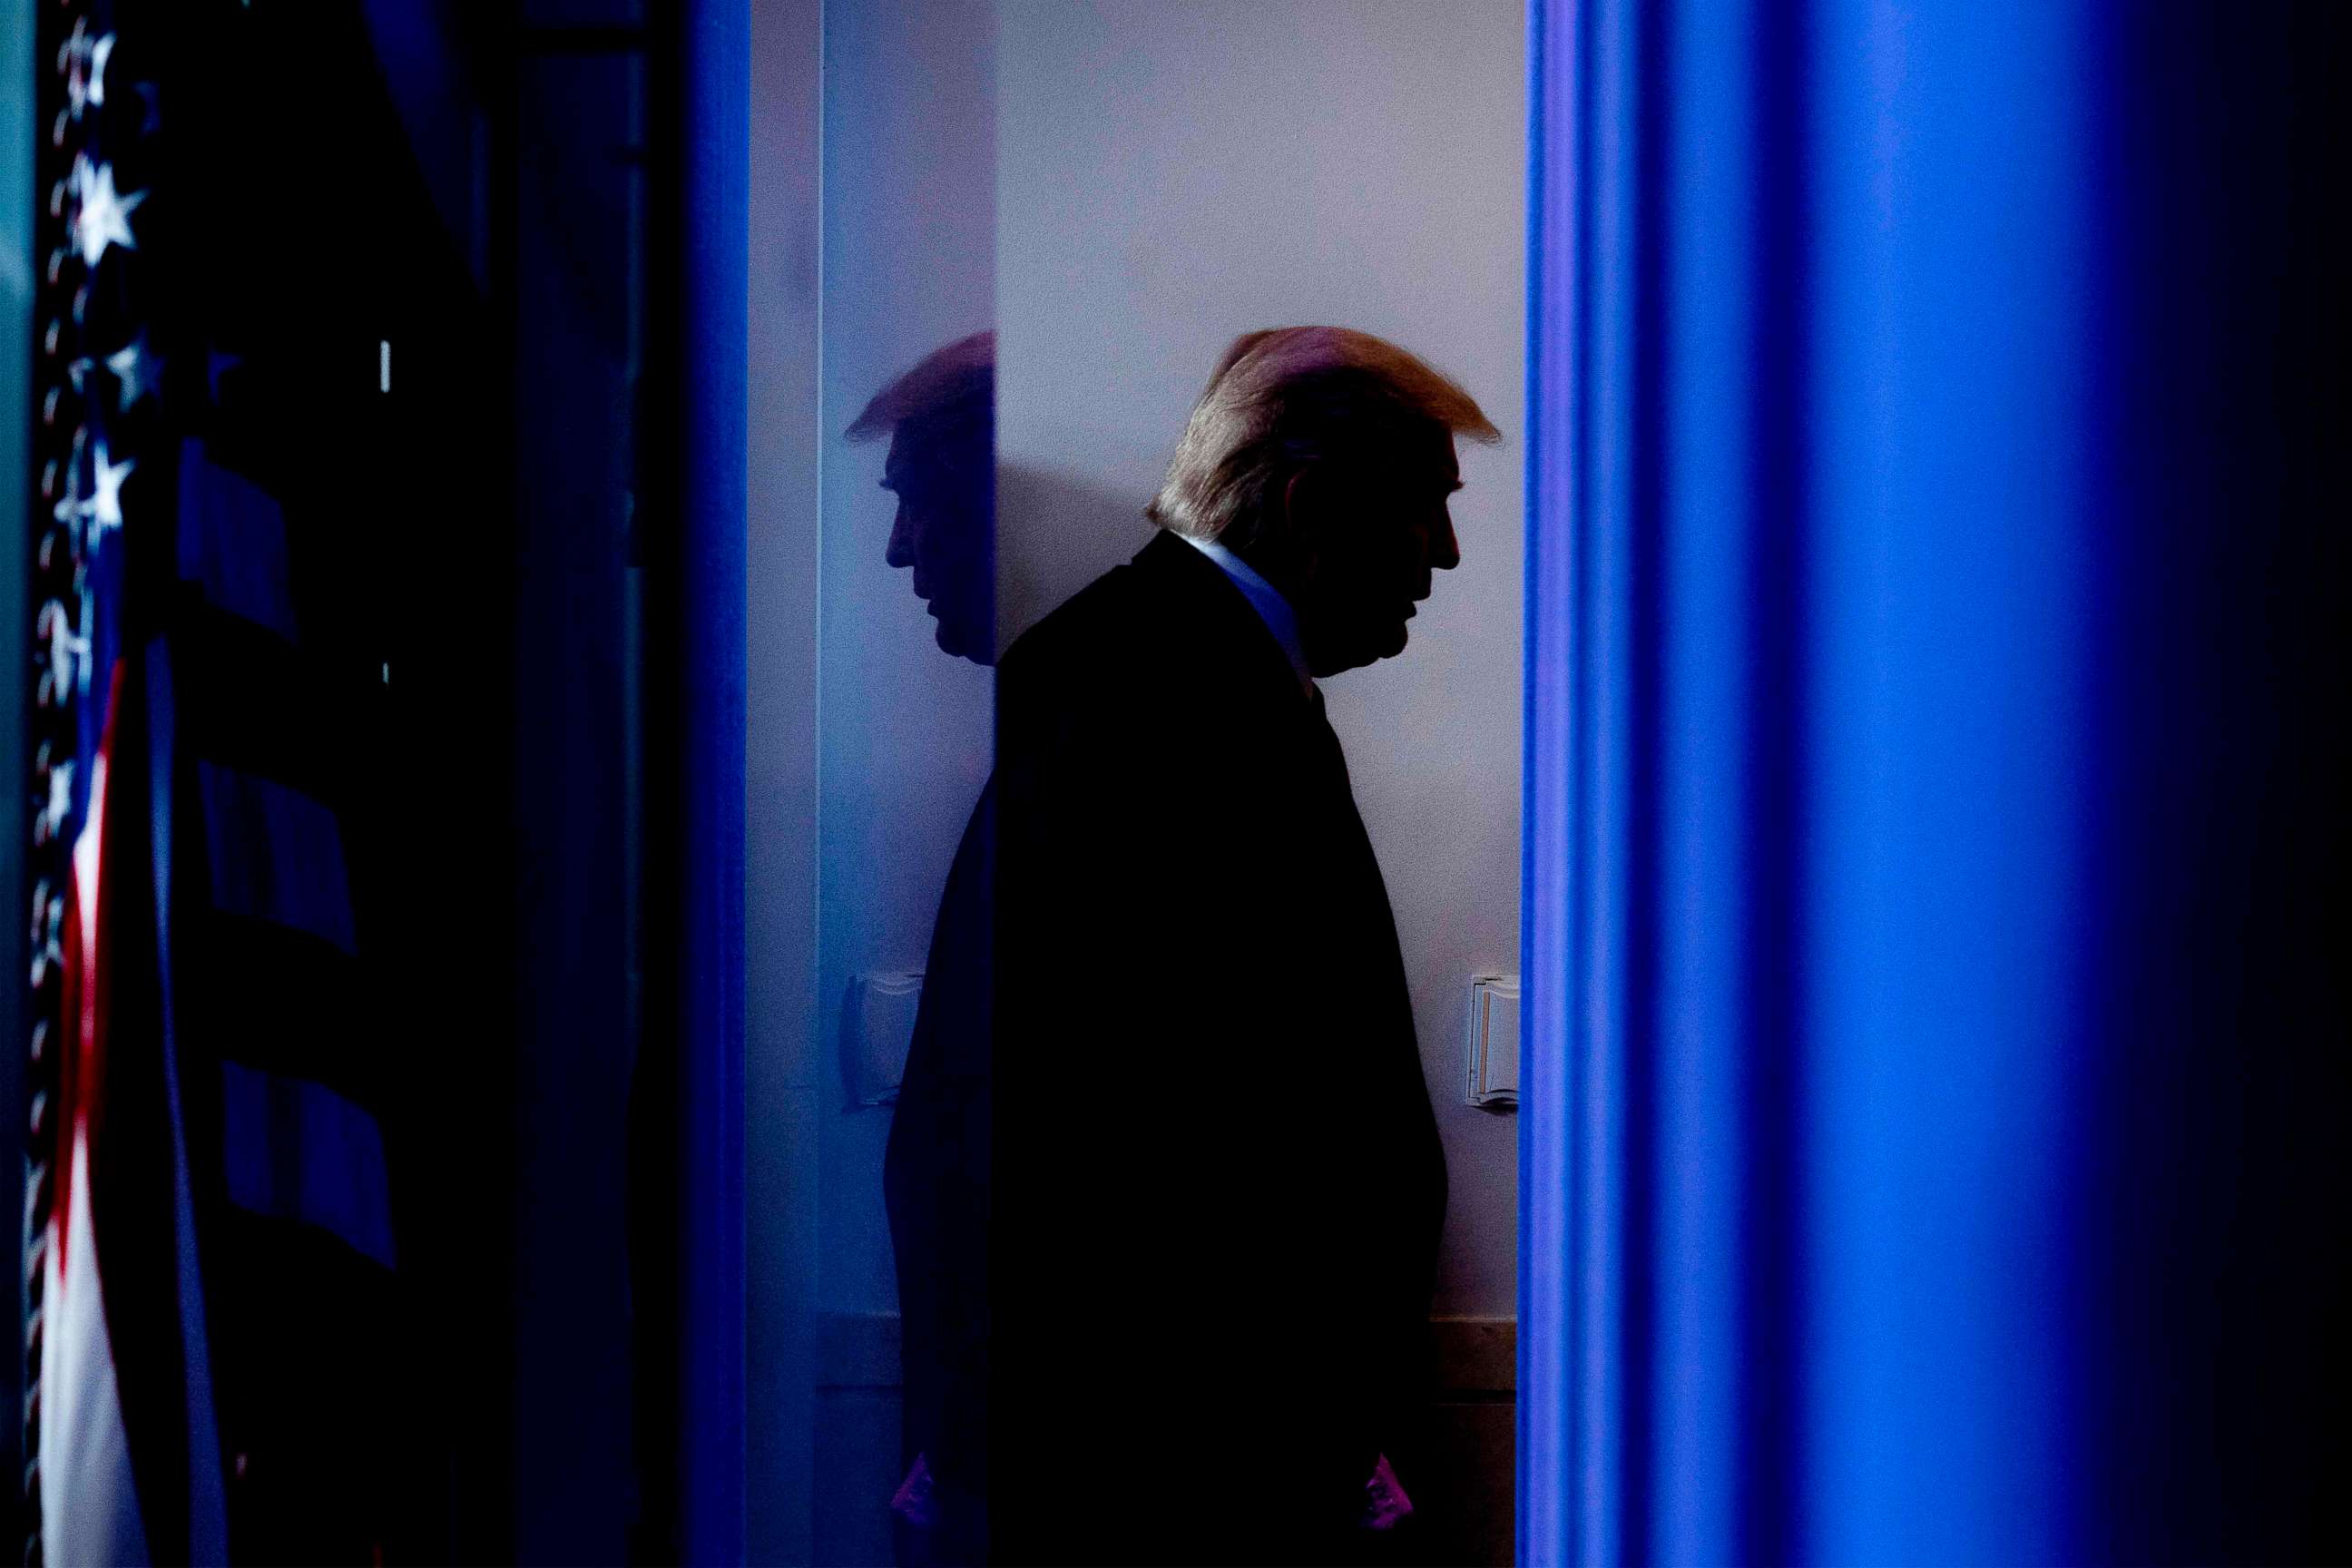 PHOTO: President Donald Trump departs after speaking during the daily briefing on the novel coronavirus, which causes COVID-19, in the Brady Briefing Room of the White House, April 17, 2020, in Washington.